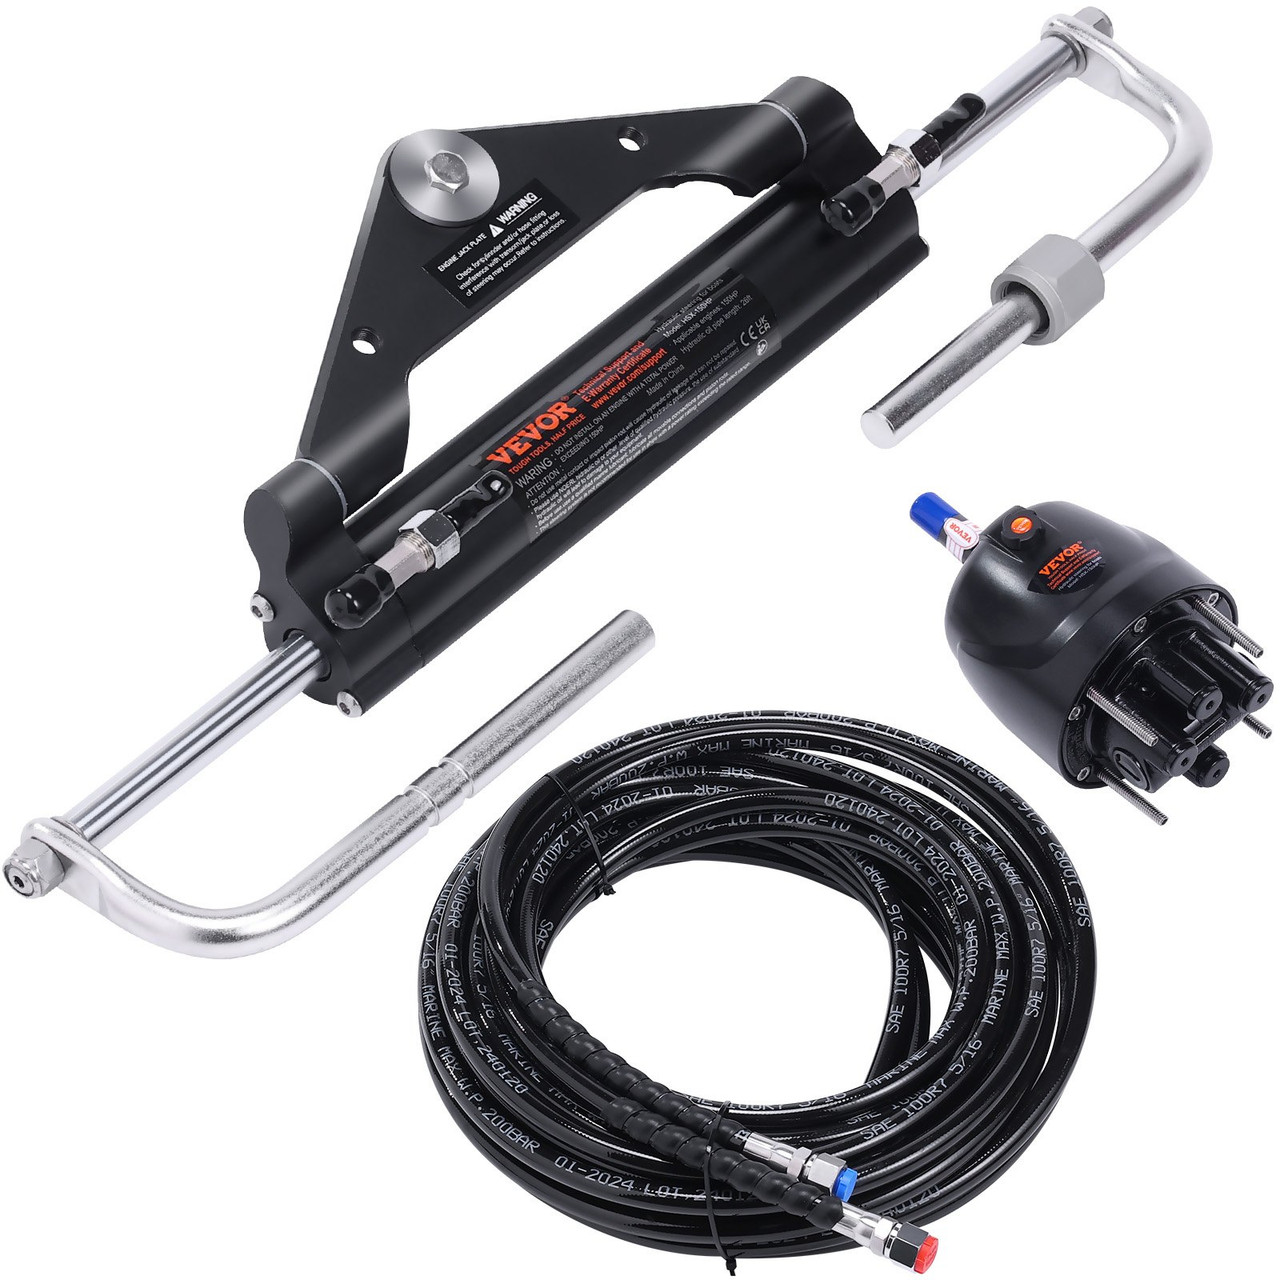 VEVOR Hydraulic Outboard Steering Kit, 150HP, Marine Boat Hydraulic Steering System, with Helm Pump Two-Way Lock Cylinder and 26 Feet Hydraulic Steering Hose, for Single Station Single-Engine Boats